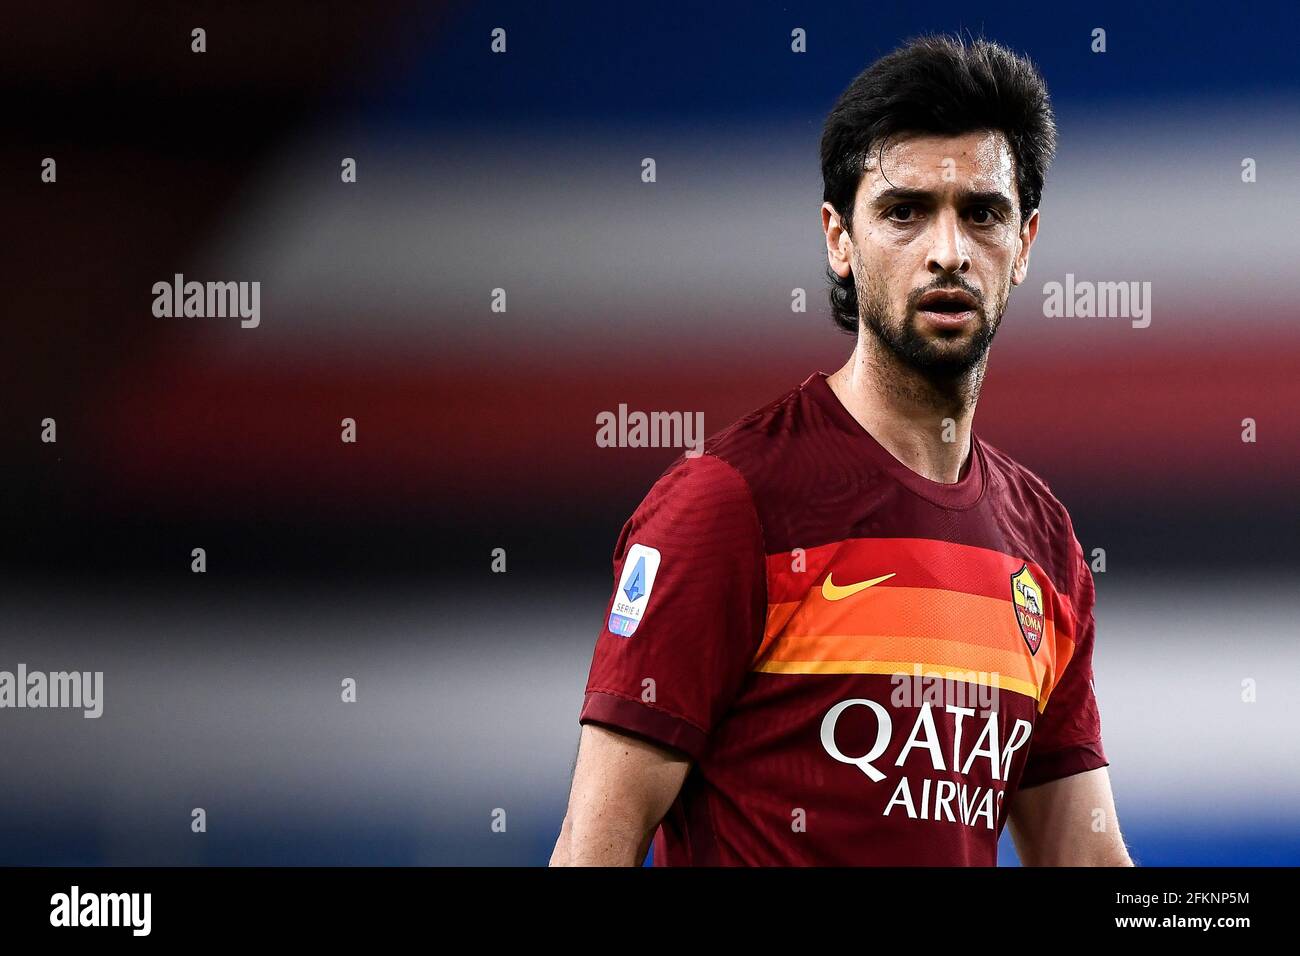 Genoa, Italy. 02 May 2021. Javier Pastore of AS Roma looks on during the Serie A football match between UC Sampdoria and AS Roma. UC Sampdoria won 2-0 over AS Roma. Credit: Nicolò Campo/Alamy Live News Stock Photo